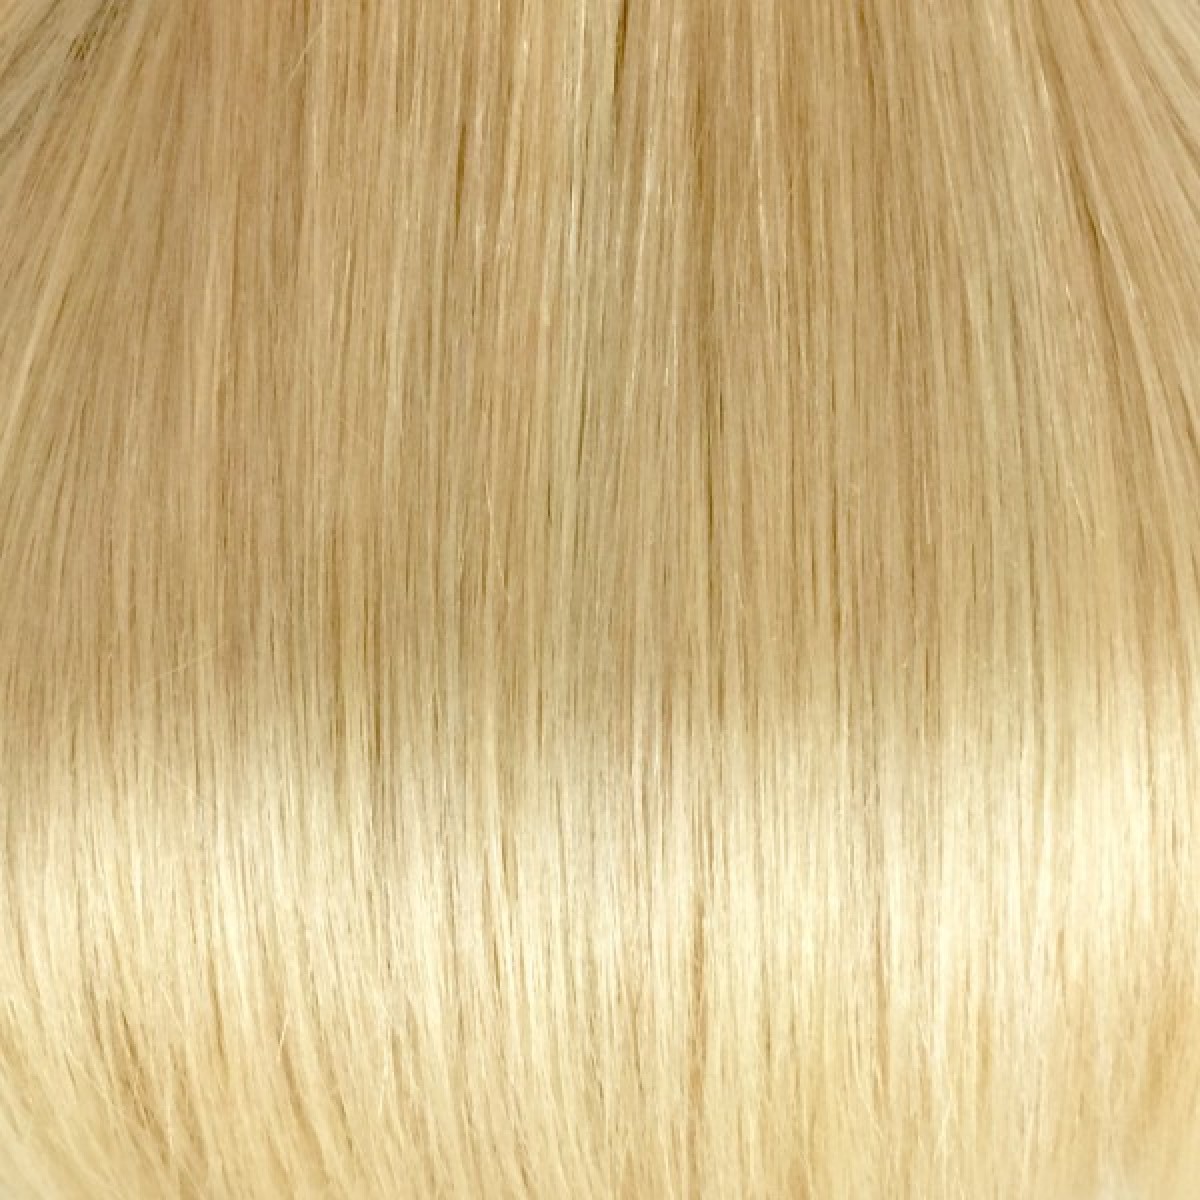 Platinum Blonde 60 24 Inch Ultimate Thick Clip In Human Hair